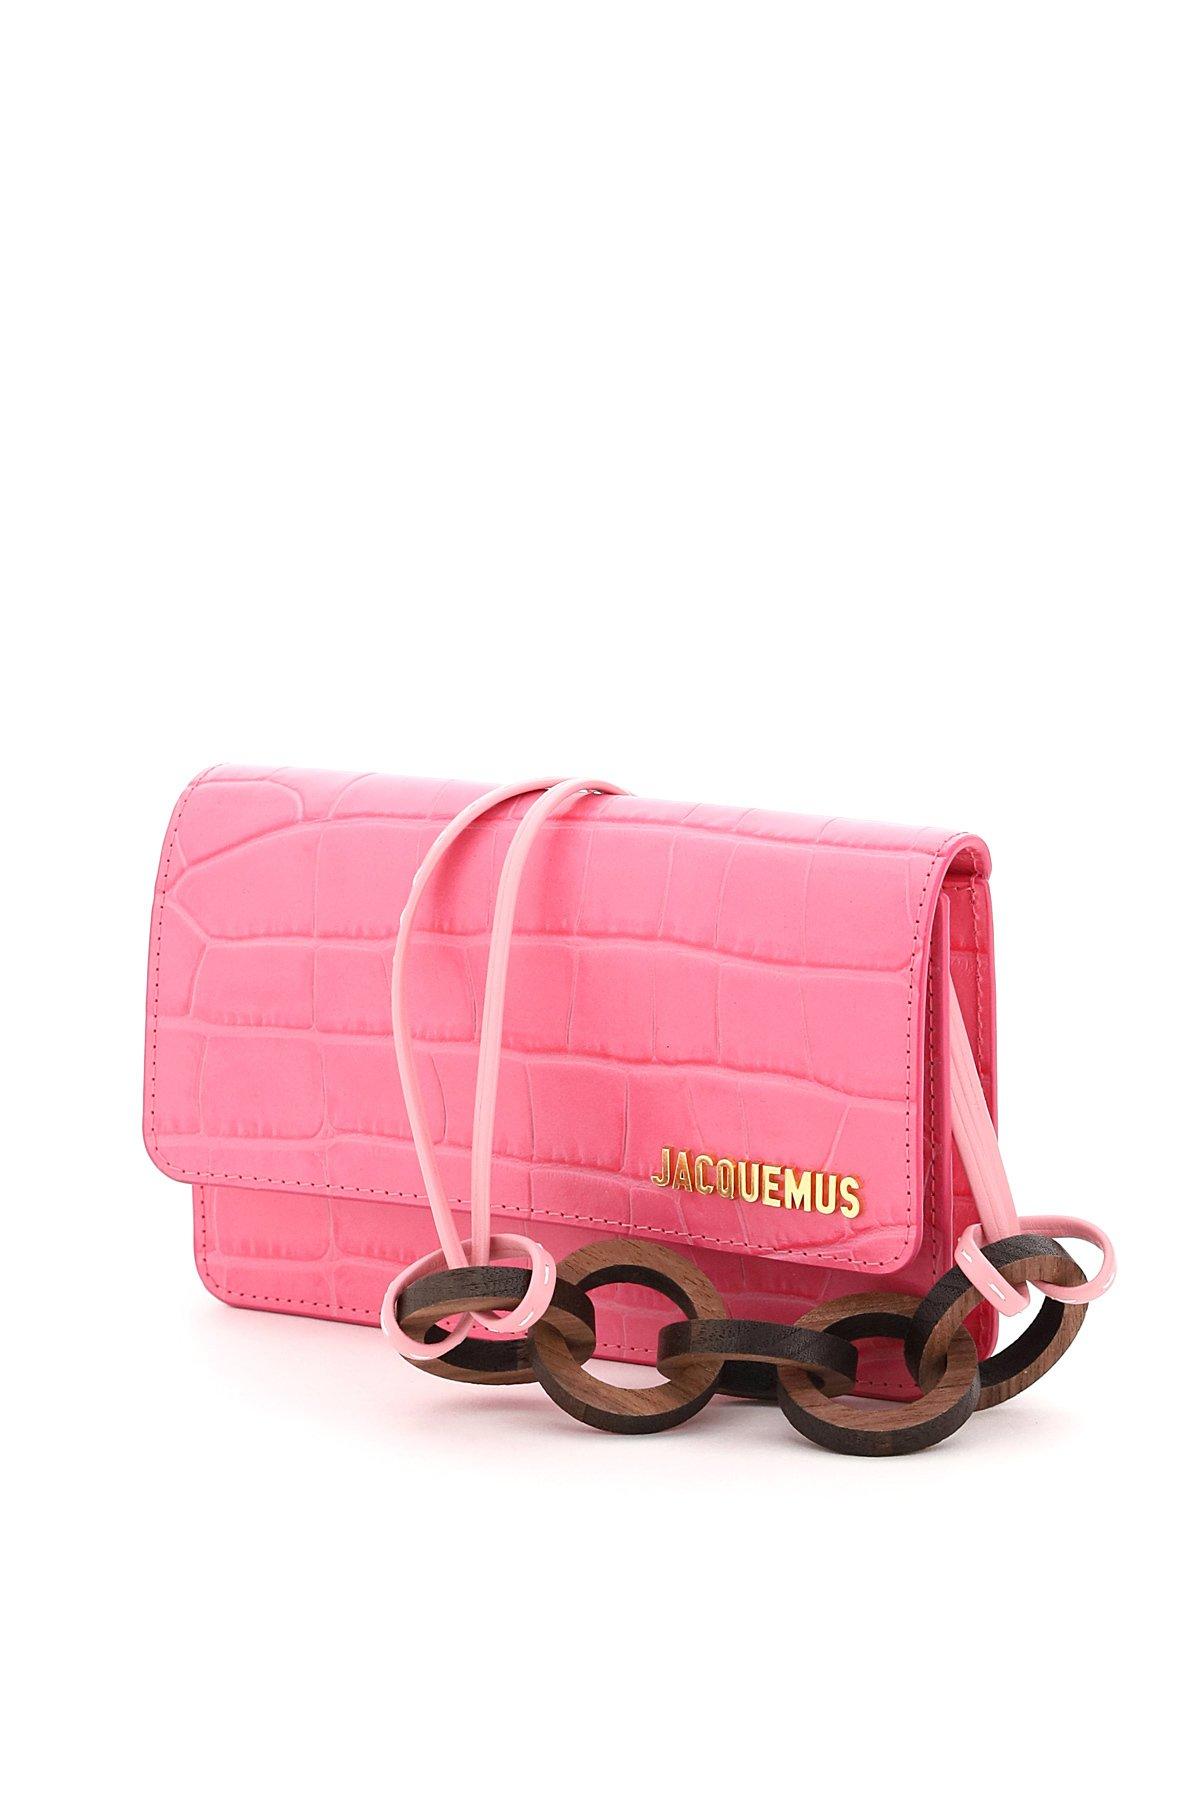 Jacquemus Le Riviera Shoulder Bag in Pink | Lyst